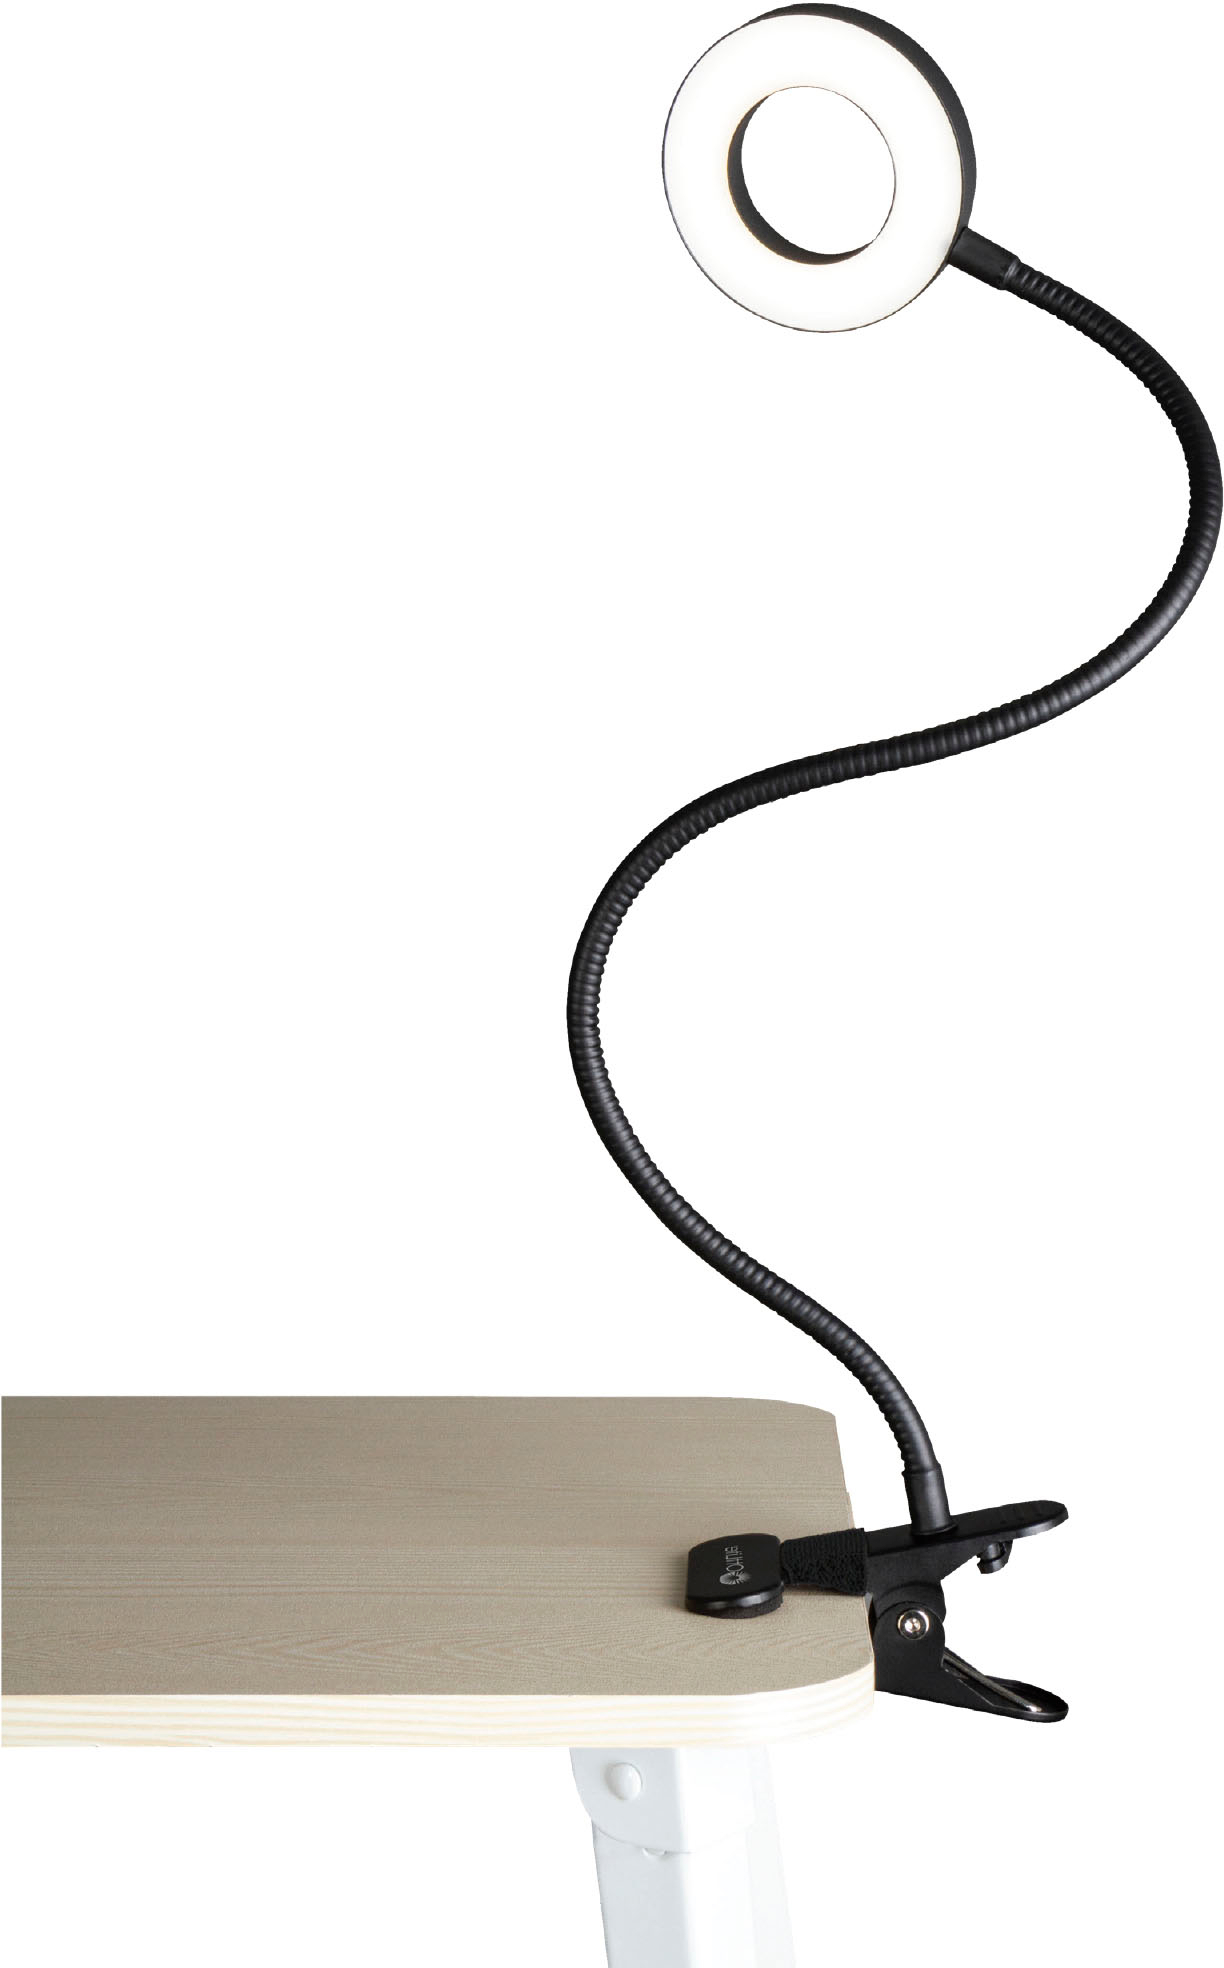 OttLite 10 in. Black Swerve LED Desk Lamp with 3 Color Modes with